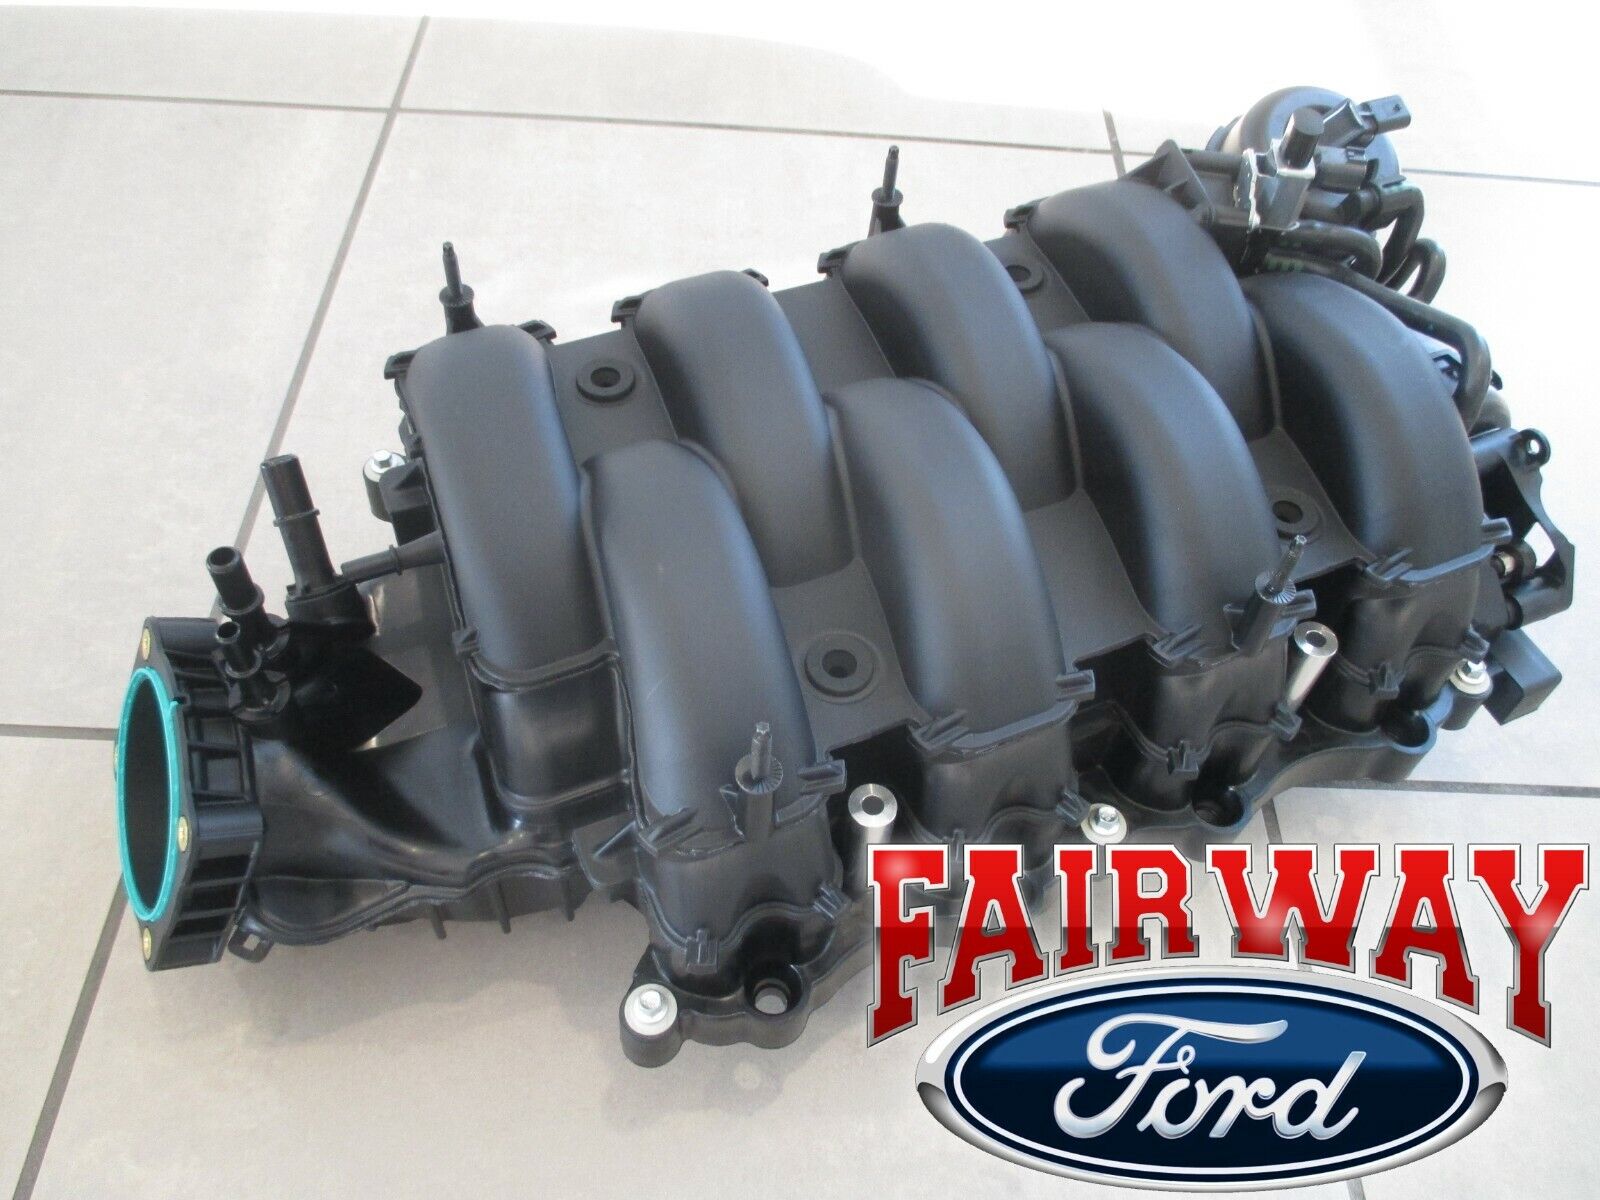 18 thru 23 Mustang OEM Genuine Ford Parts Intake Manifold 5.0L Coyote GT V8 NEW